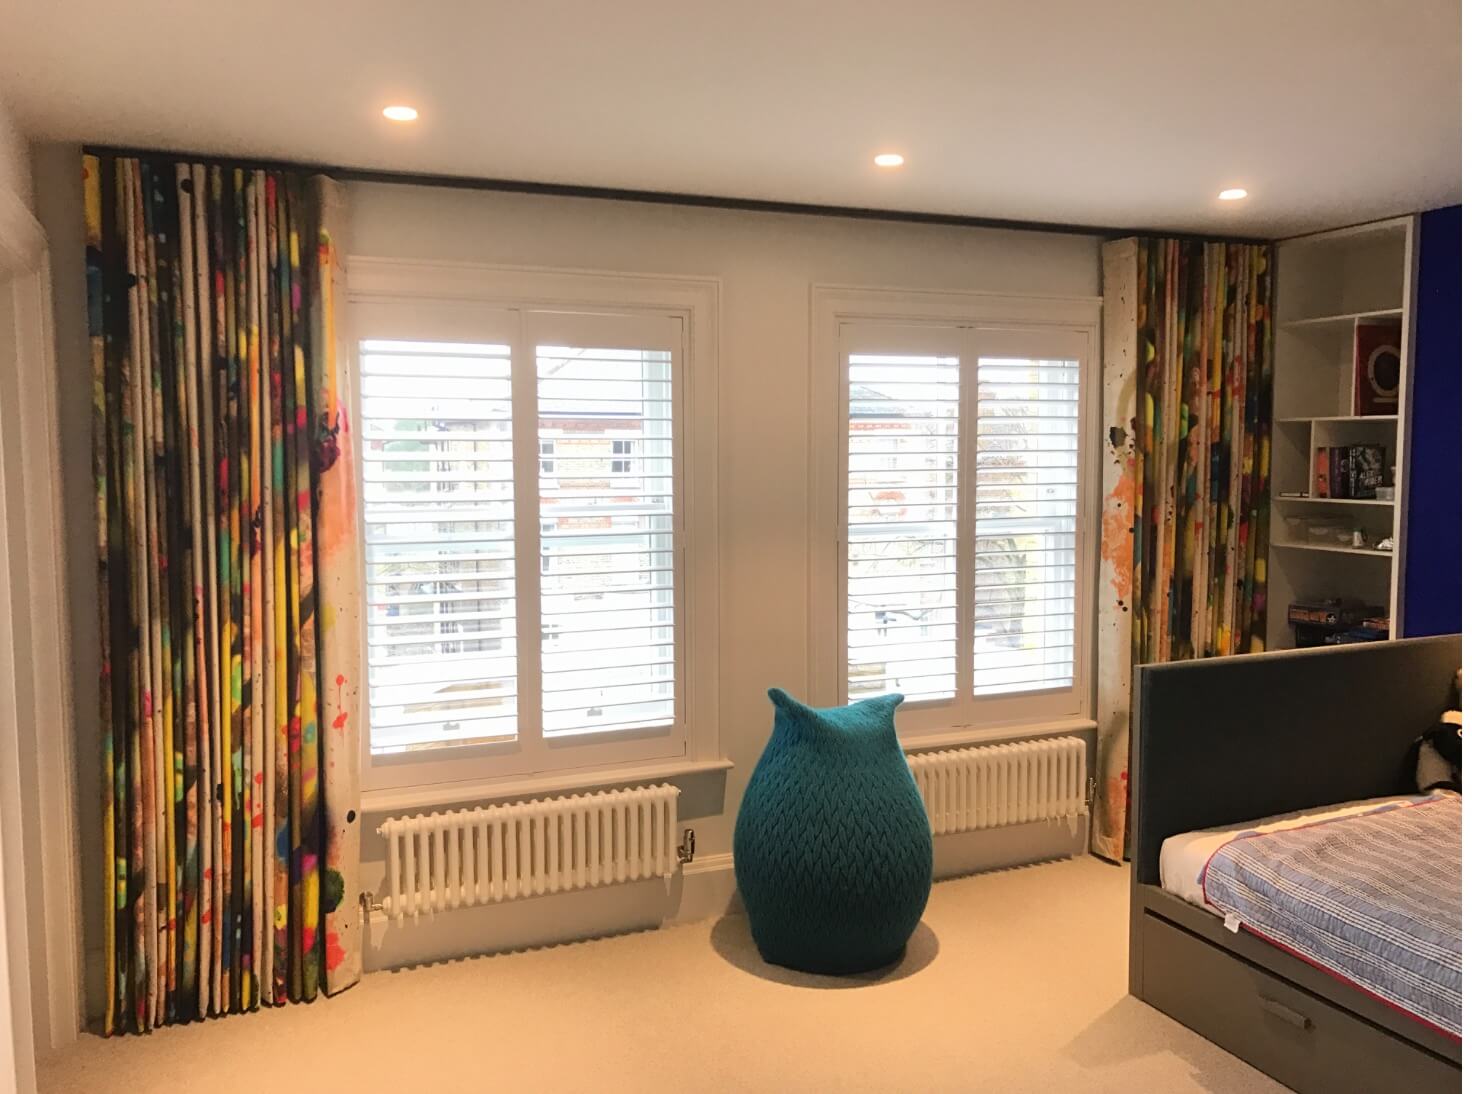 Bespoke wave curtains in colourful fabric